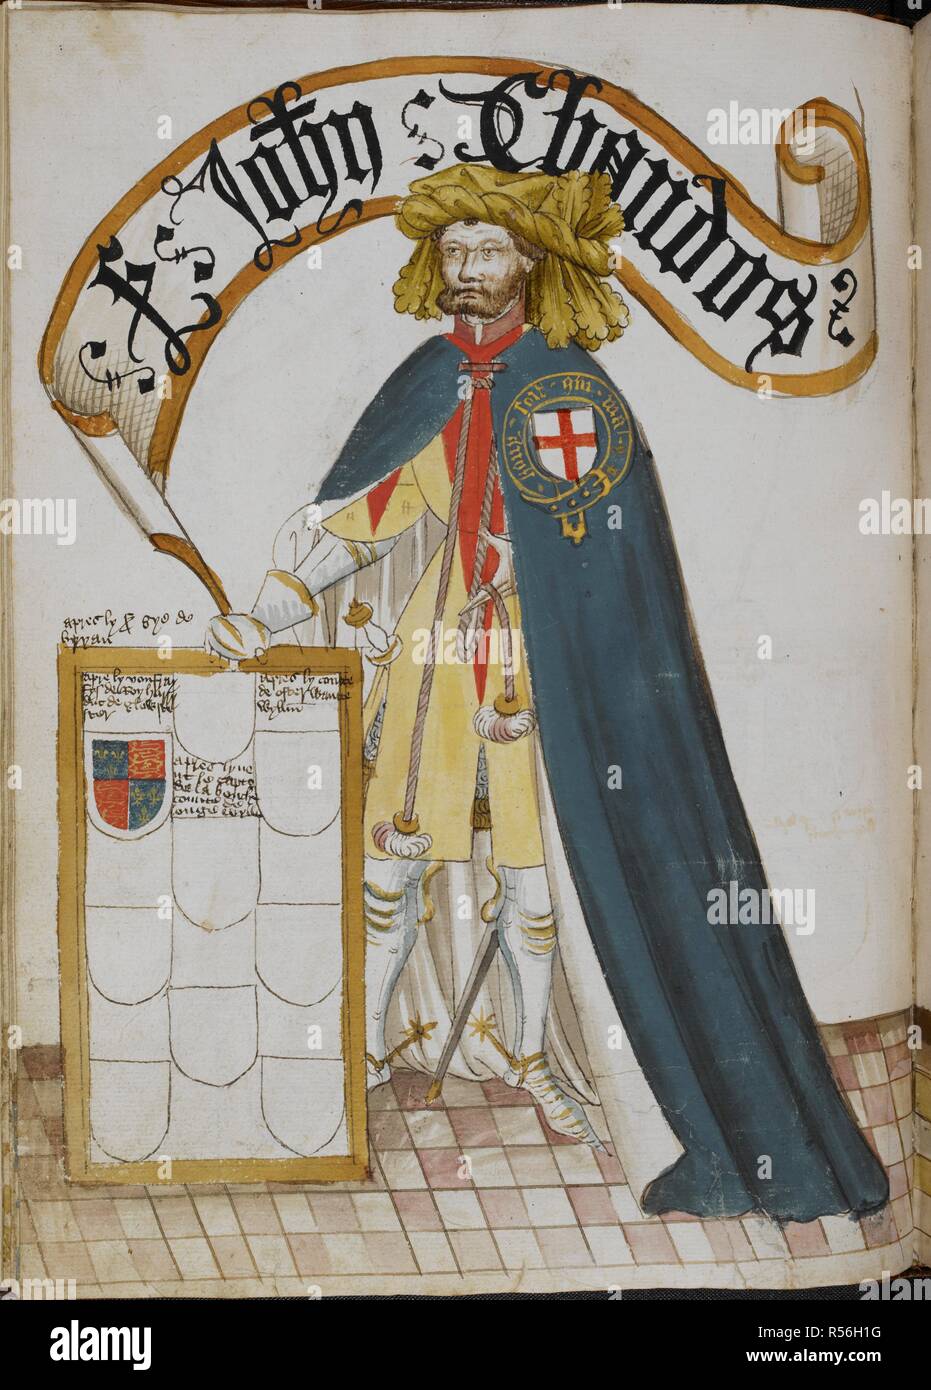 Sir John Chandos (d.1369), a founder Knight of the Order of the Garter, wearing a blue Garter mantle over plate armour and surcoat displaying his arms. . Pictorial book of arms of the Order of the Garter ('William Bruges's Garter Book'). England, S. E. (probably London); c. 1430- c. 1440 (before 1450). Source: Stowe 594 f.12v. Stock Photo